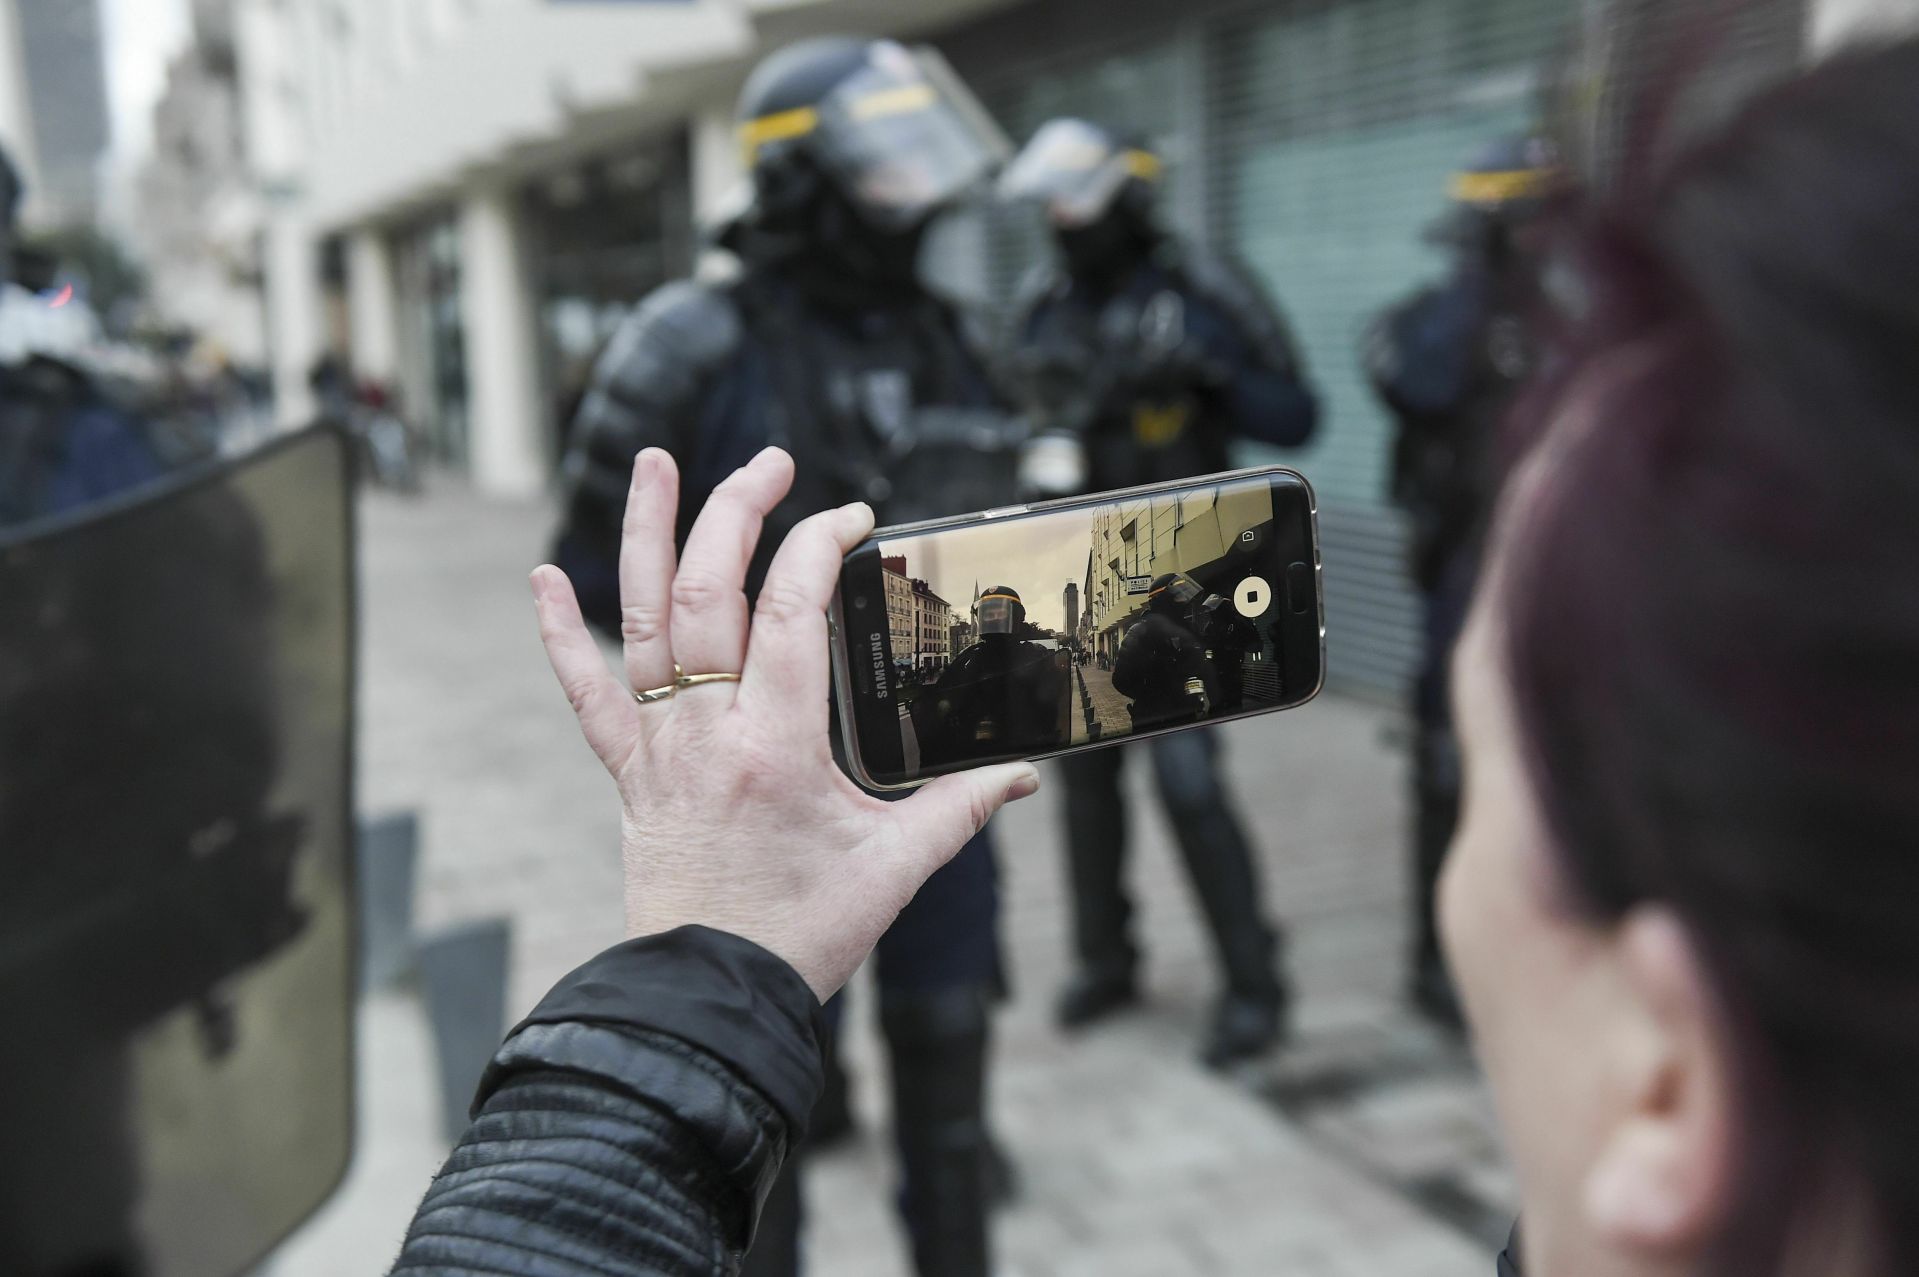 A protestor recording with her smartphone during an anti-government demonstration called by the Yellow Vests "Gilets Jaunes" movement in Nantes, western France, on March 02, 2019. 'Yellow vest' anti-government protesters have taken to the streets in France for the 16th consecutive Saturday on February 02 2019. (Sipa via AP Images)